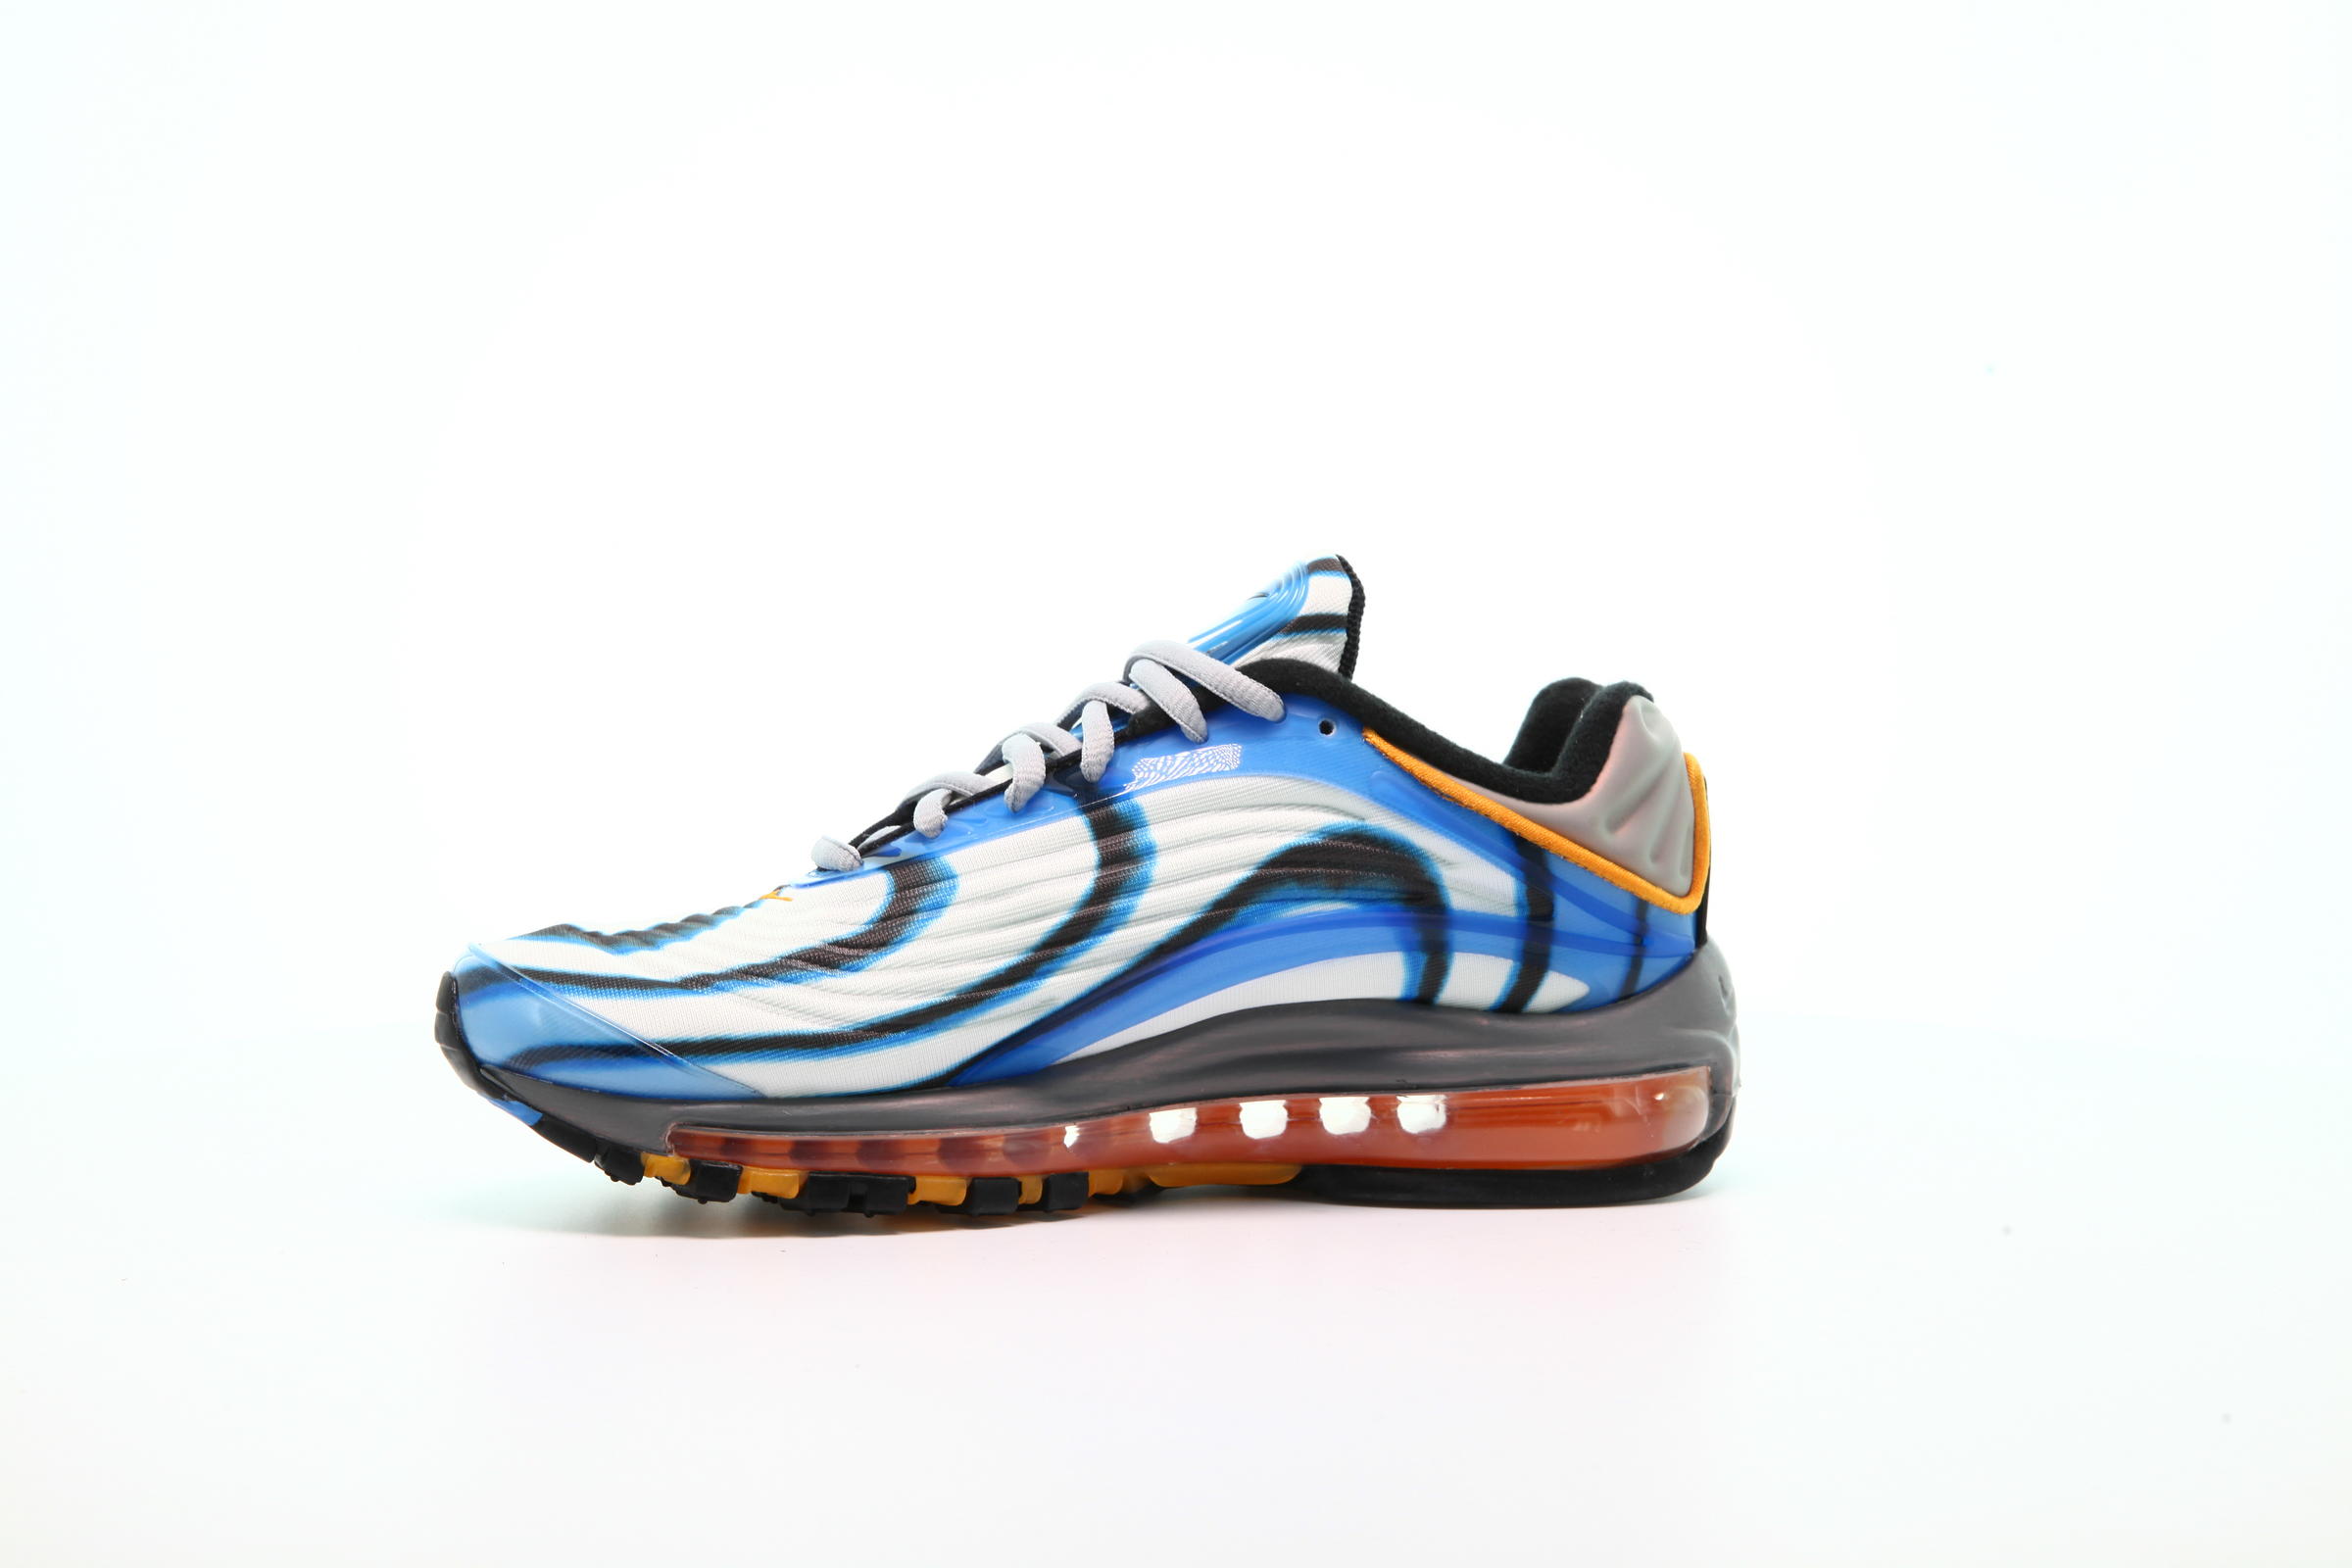 Nike WMNS Air Max Deluxe "Photo Blue"